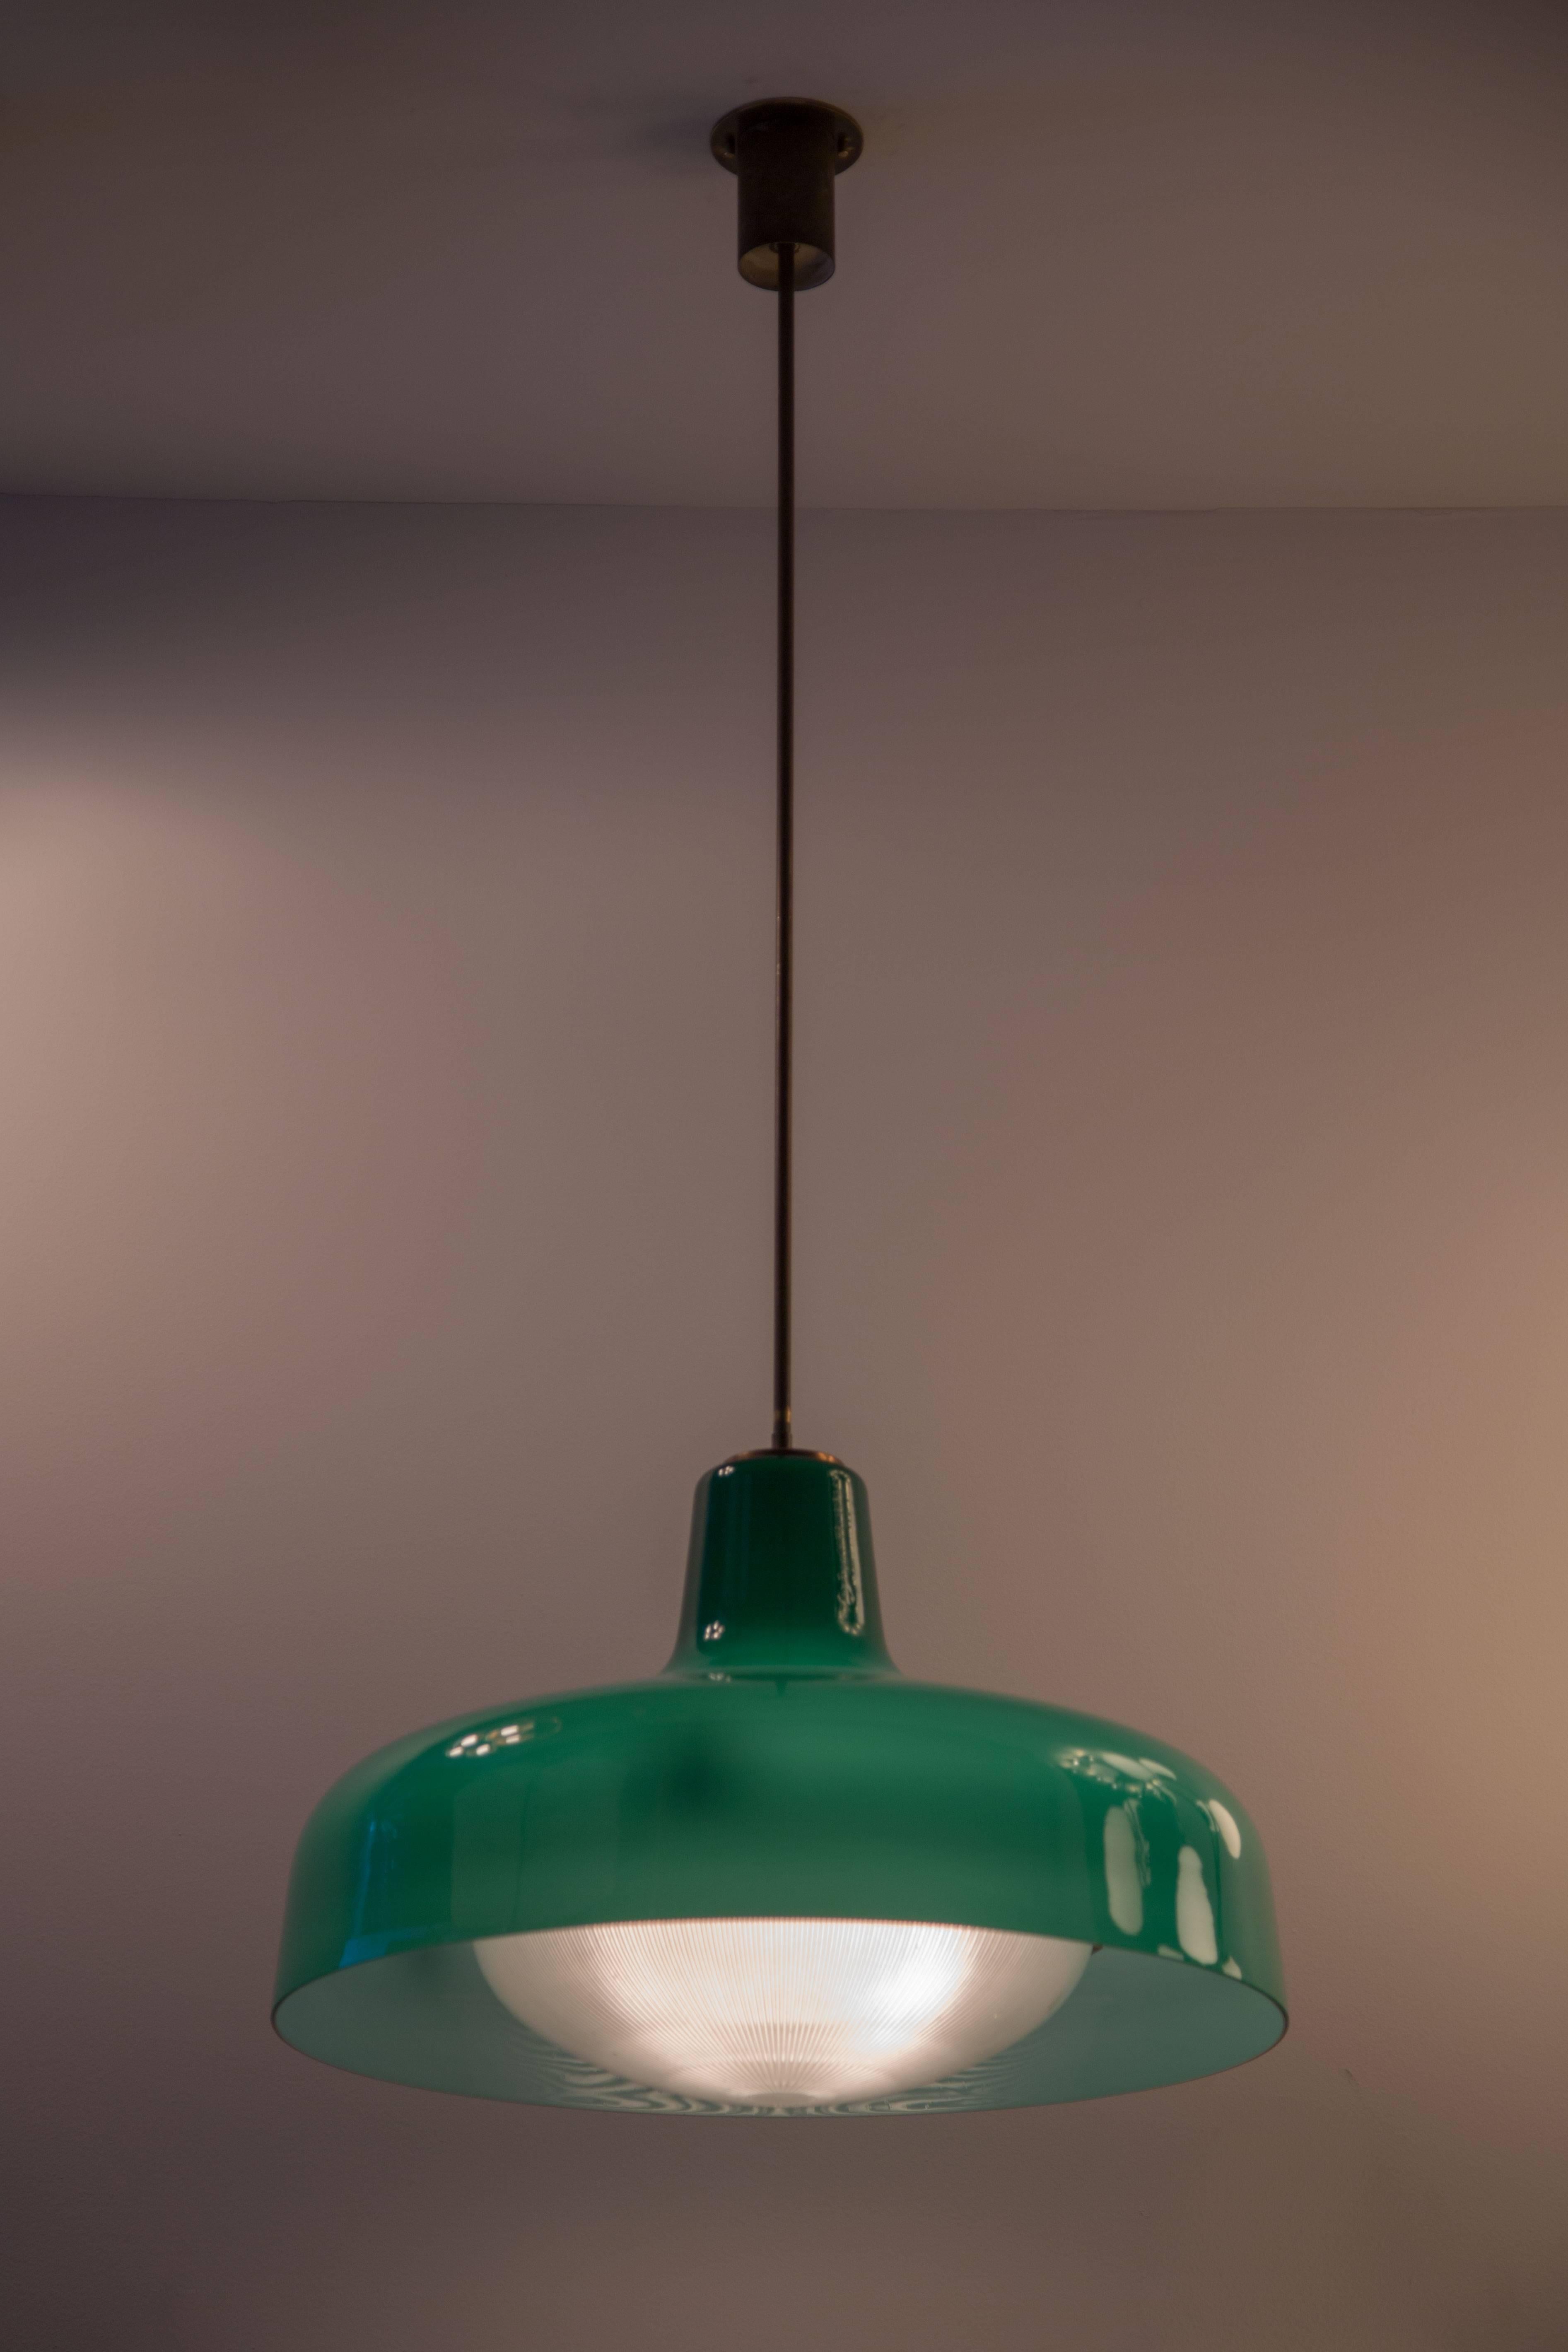 Green glass pendant with Holophane glass diffuser designed for Azucena.